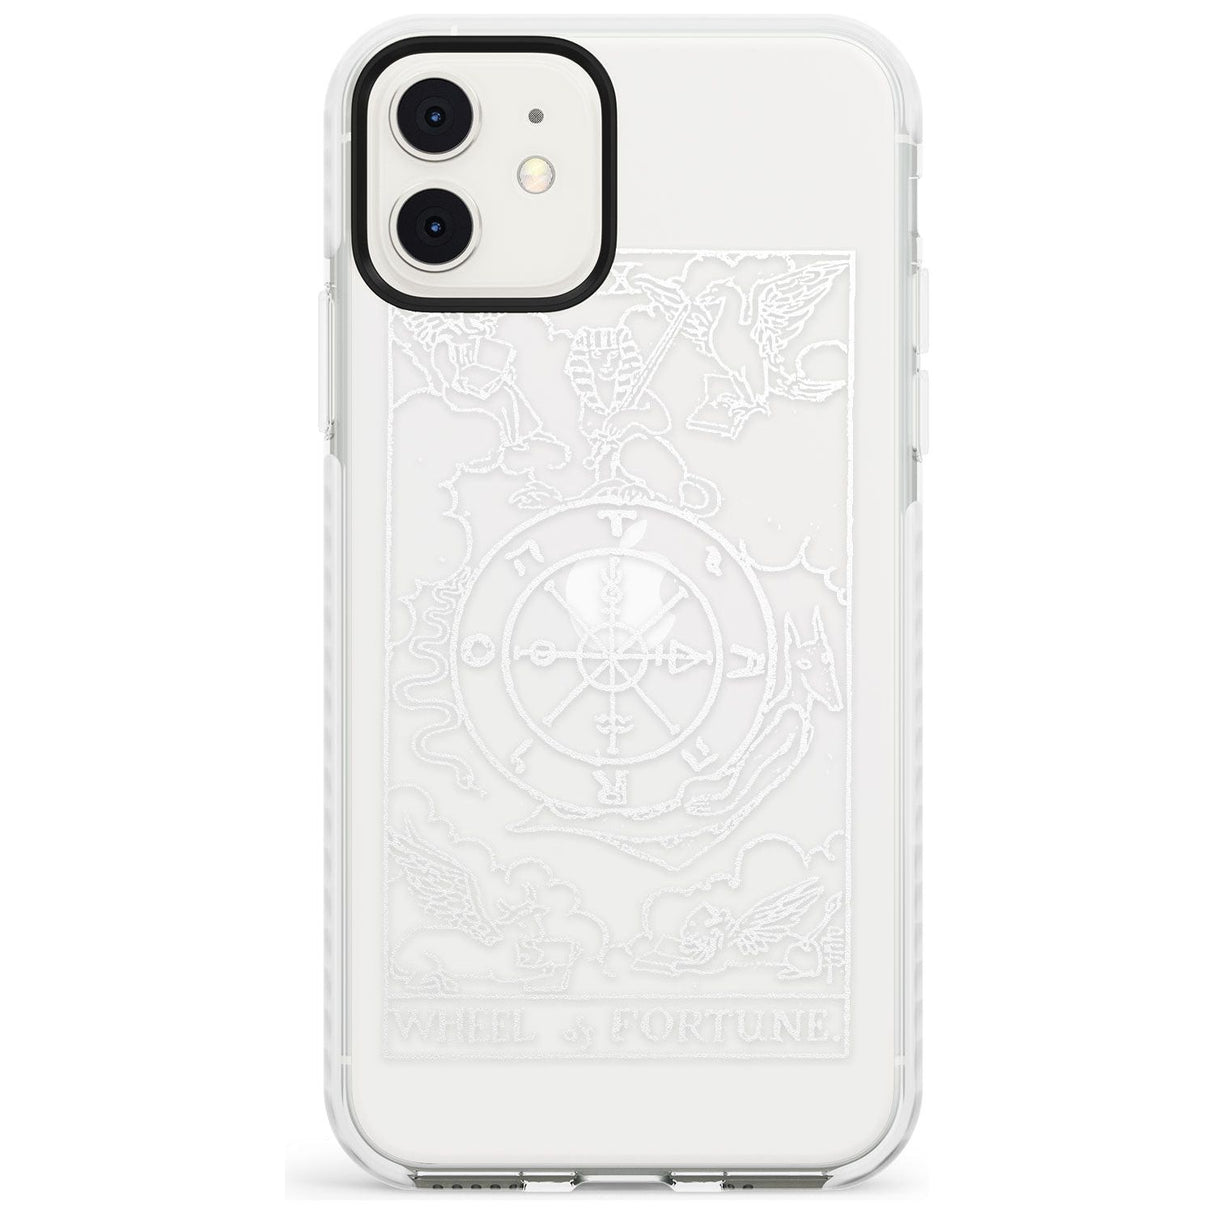 Wheel of Fortune Tarot Card - White Transparent Slim TPU Phone Case for iPhone 11